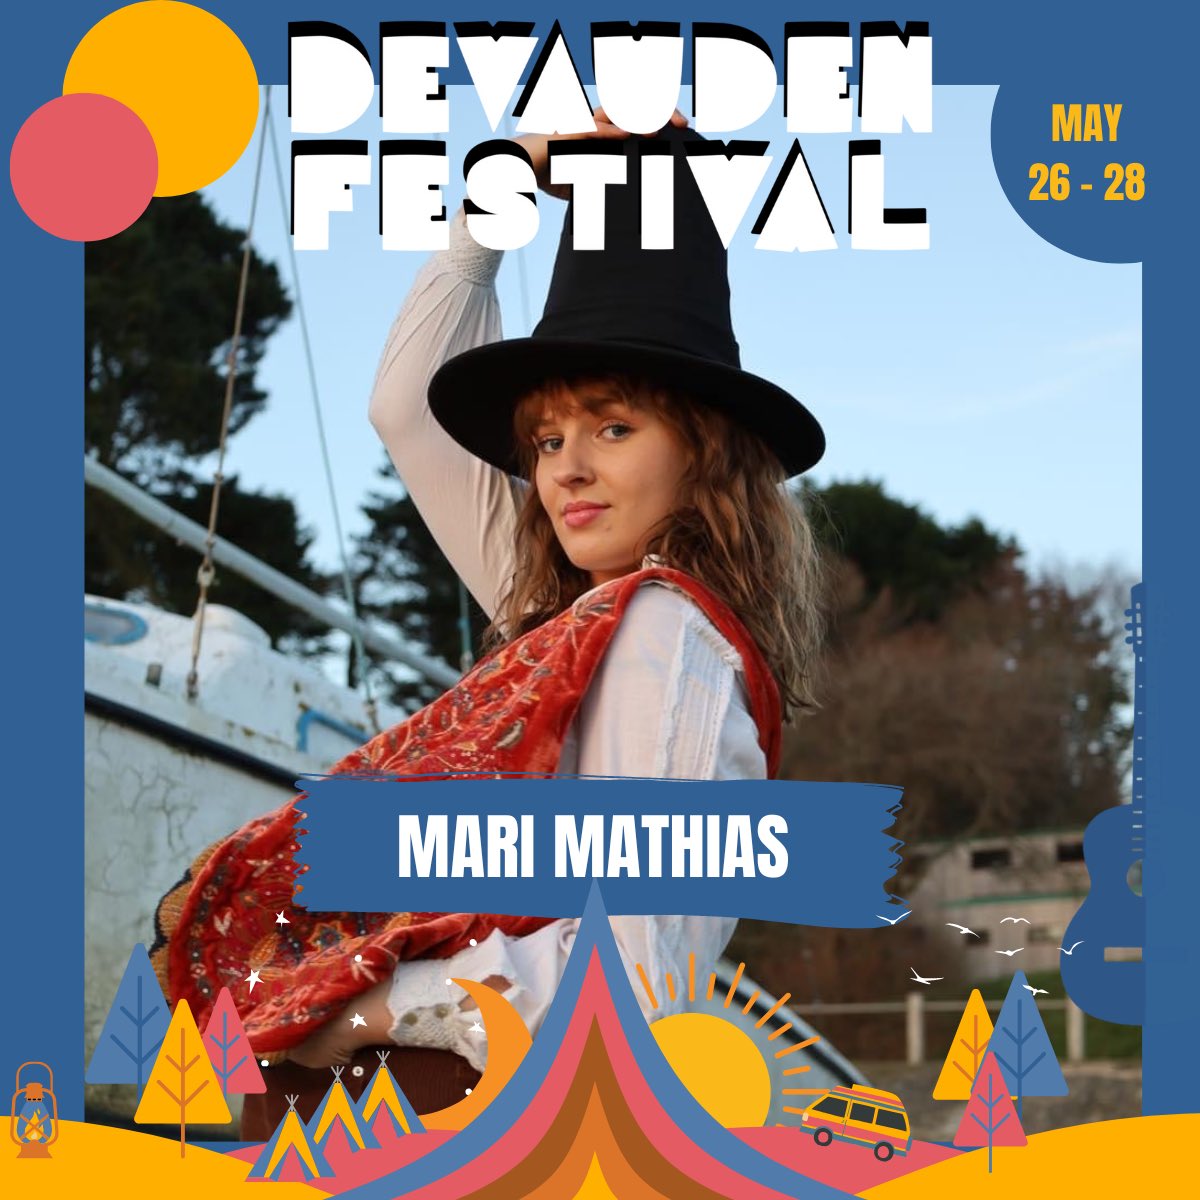 📣 Introducing @MariMathias14 📣 Mari sings in her native welsh tongue, marrying intimate moments of storytelling & spoken word with delicate harmonies and exciting instrumentation. Not to be missed!! Catch her set on May 27th. devaudenfestival.com